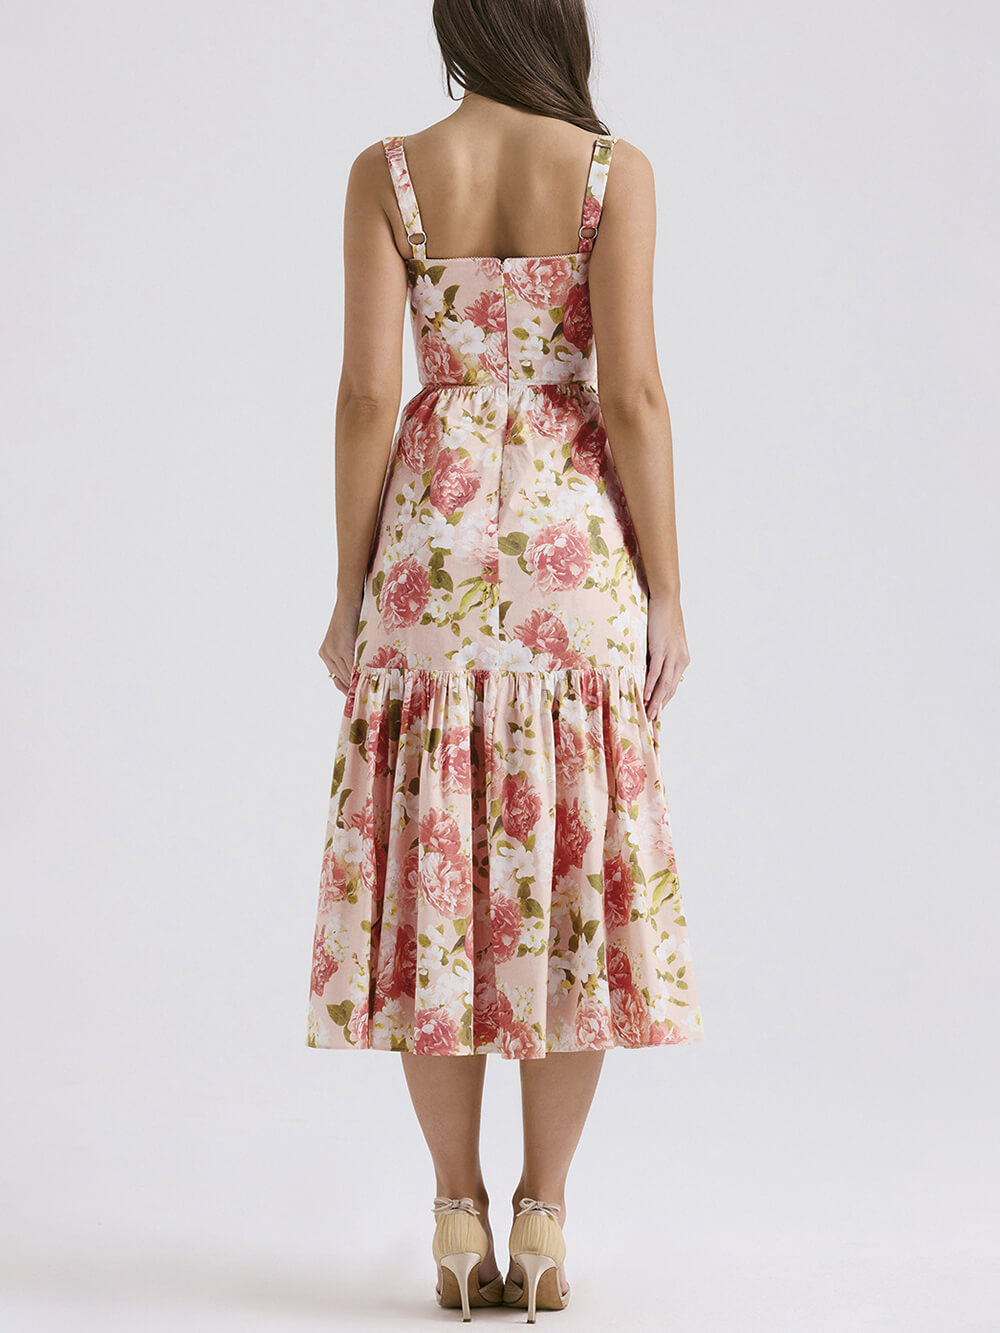 Sweet Spicy Style Floral Backless Midi Dresses